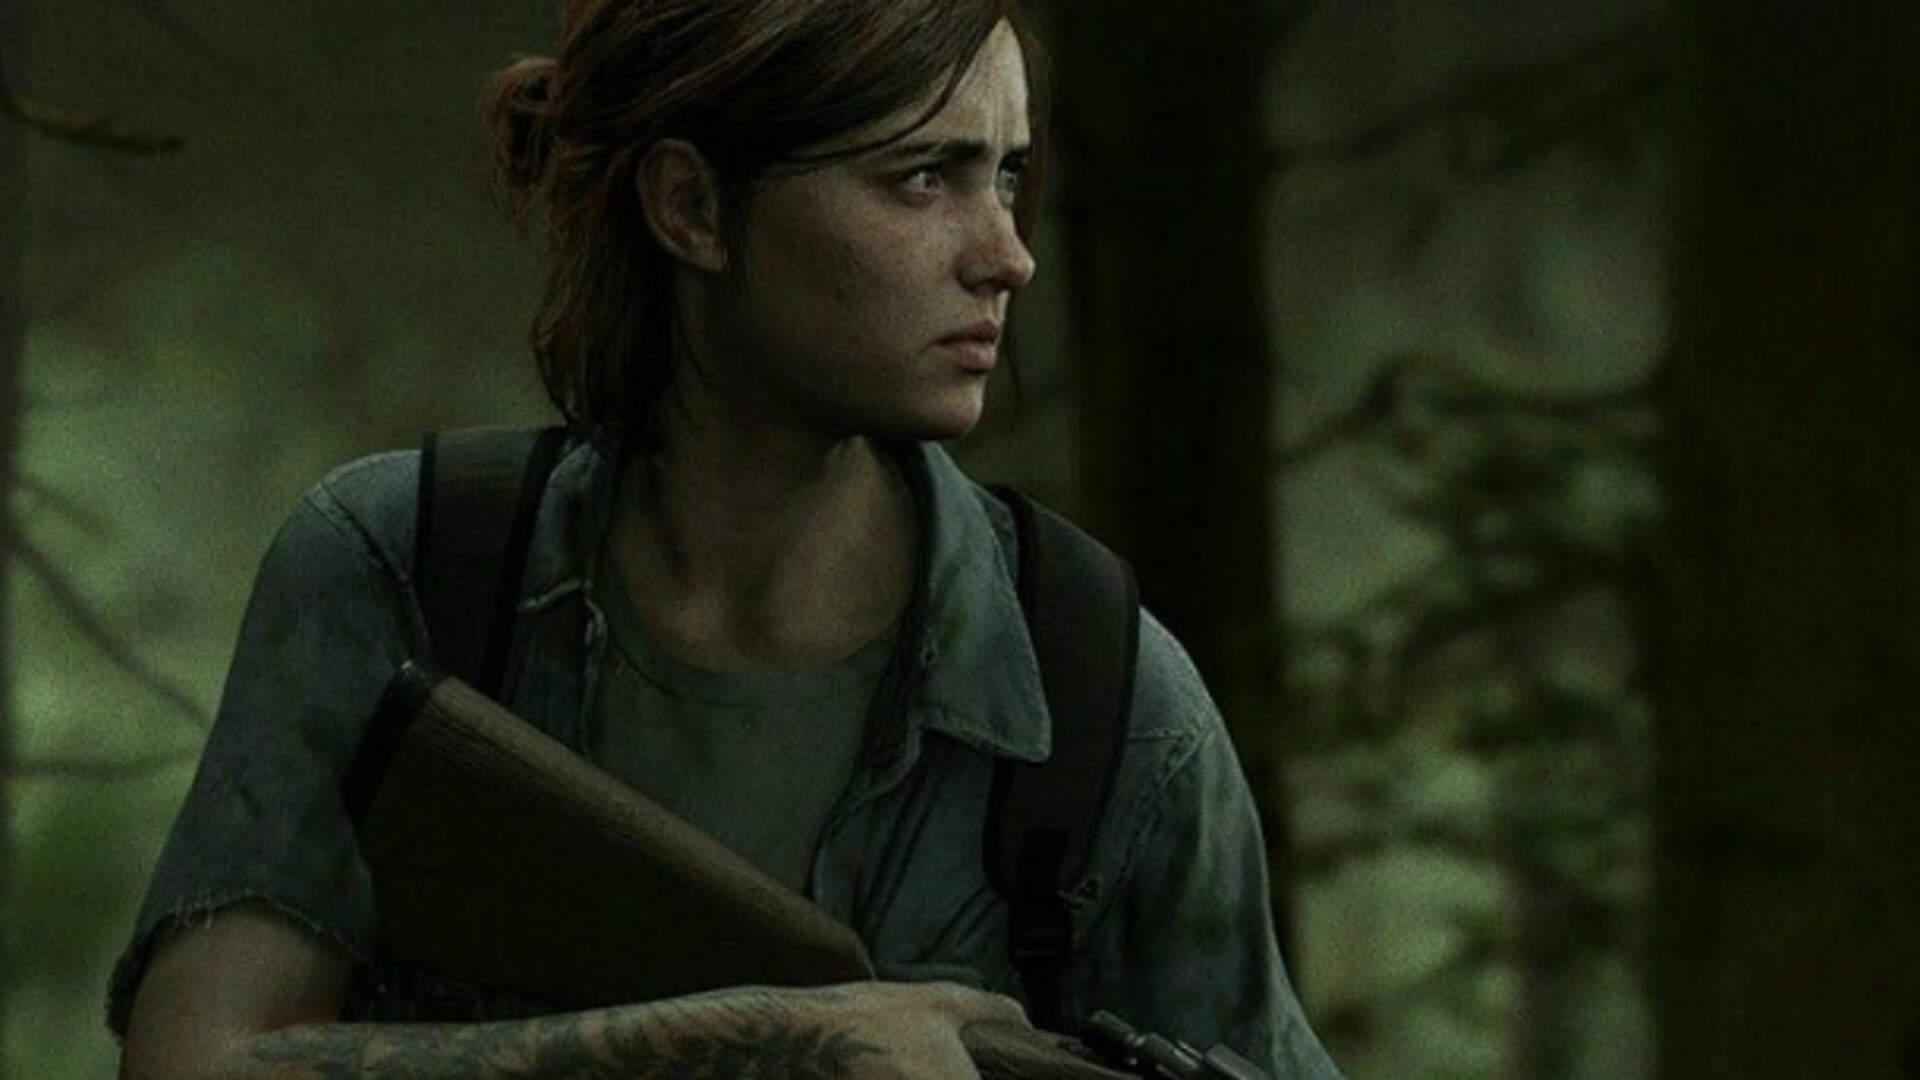 Story and Cordyceps Infection Explained - The Last of Us Part 1